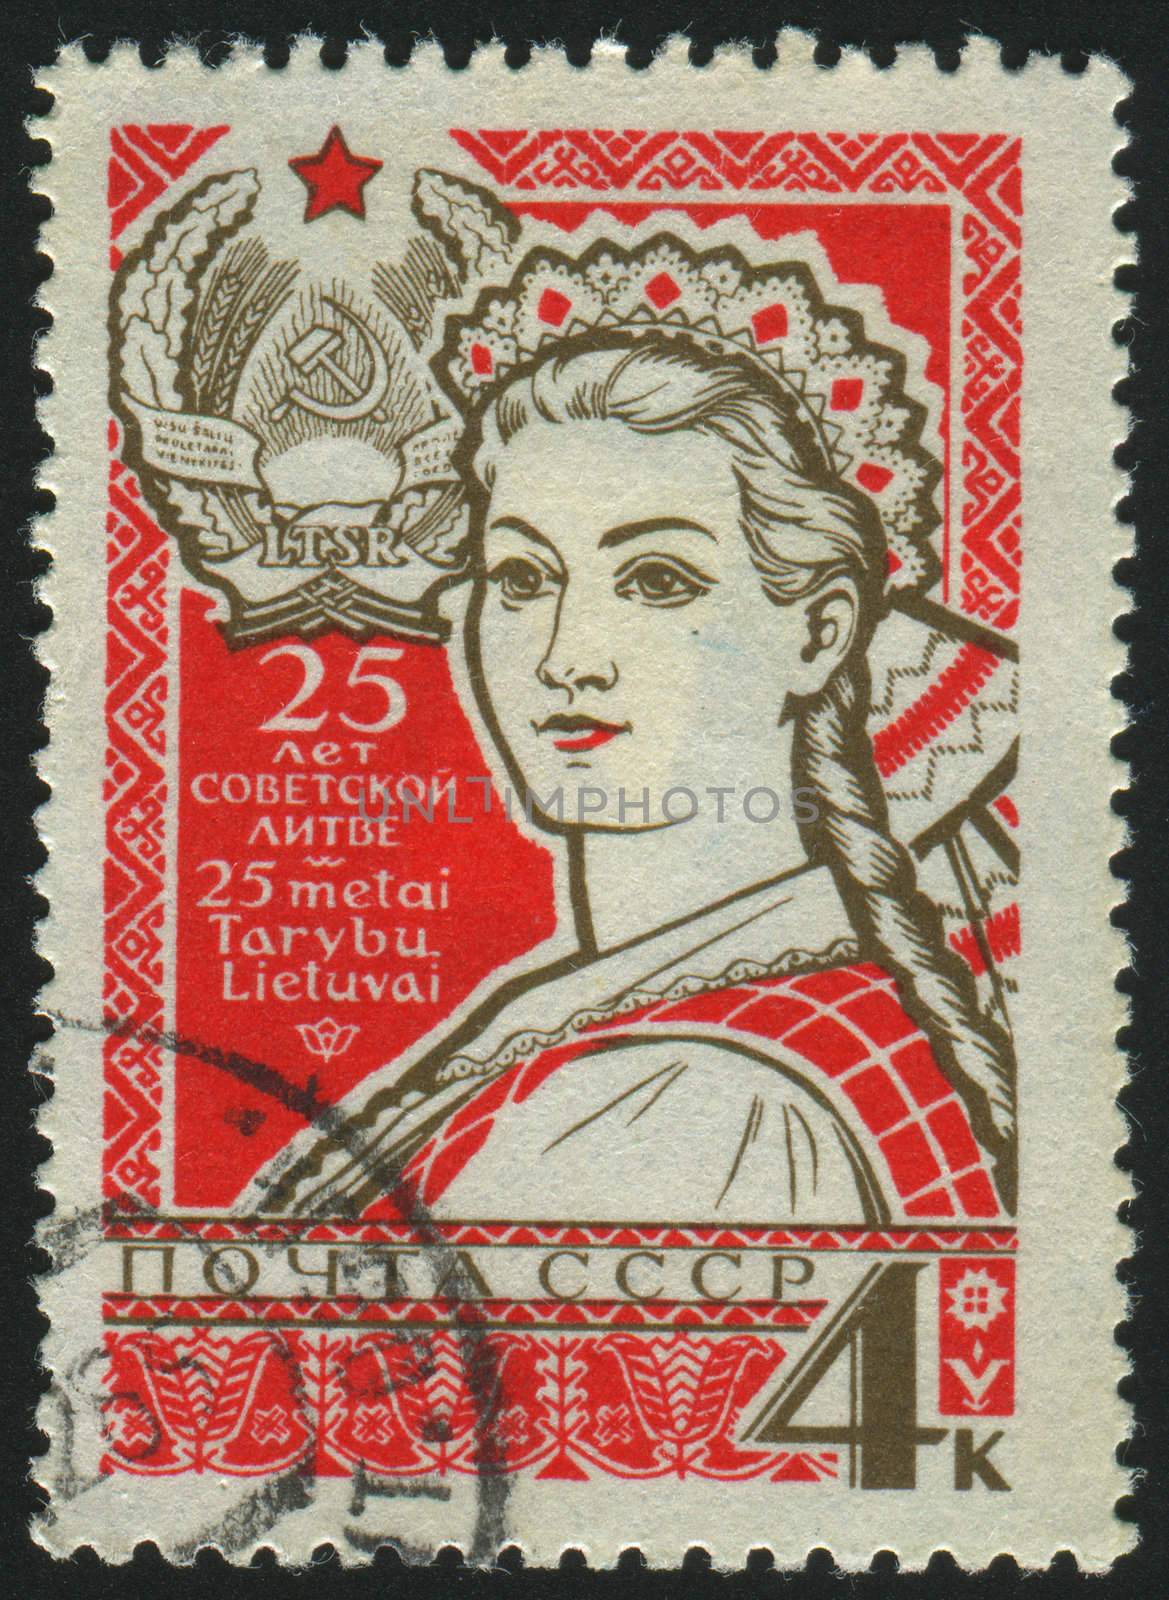 RUSSIA - CIRCA 1965: stamp printed by Russia, shows woman, circa 1965.